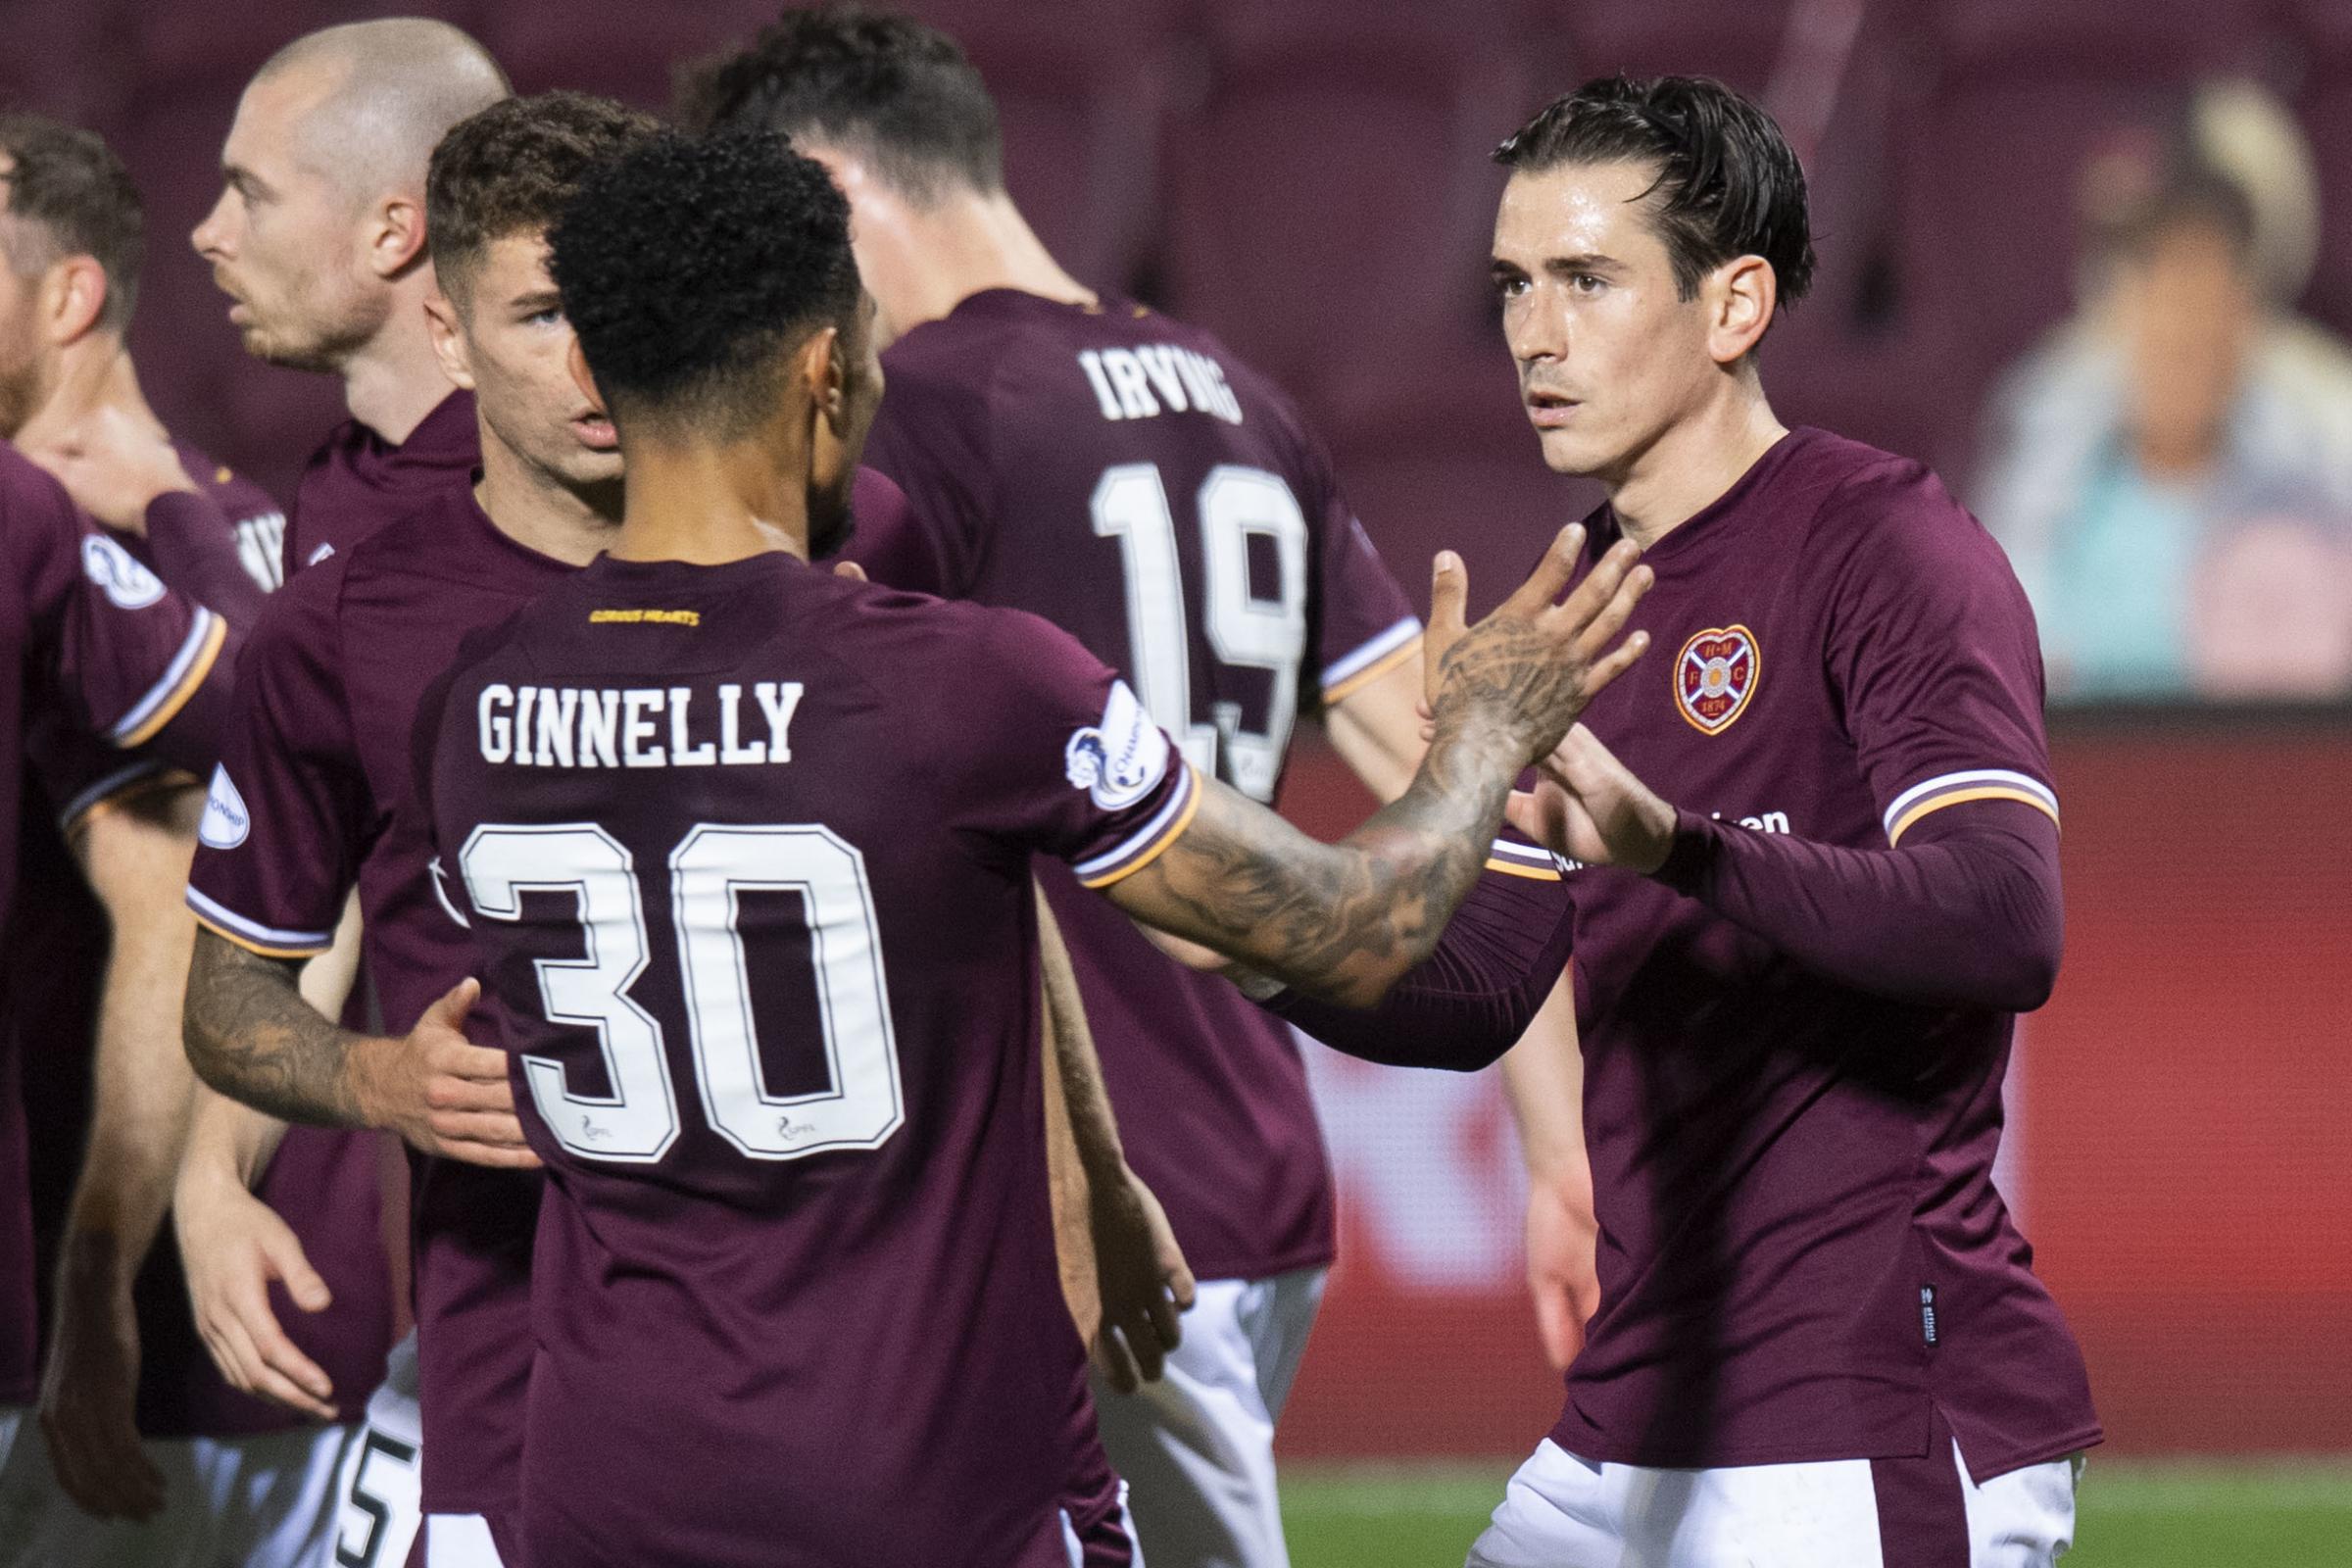 Hearts 1 Inverness CT 0: Jamie Walker spot on as Robbie Neilson kicks off with a win